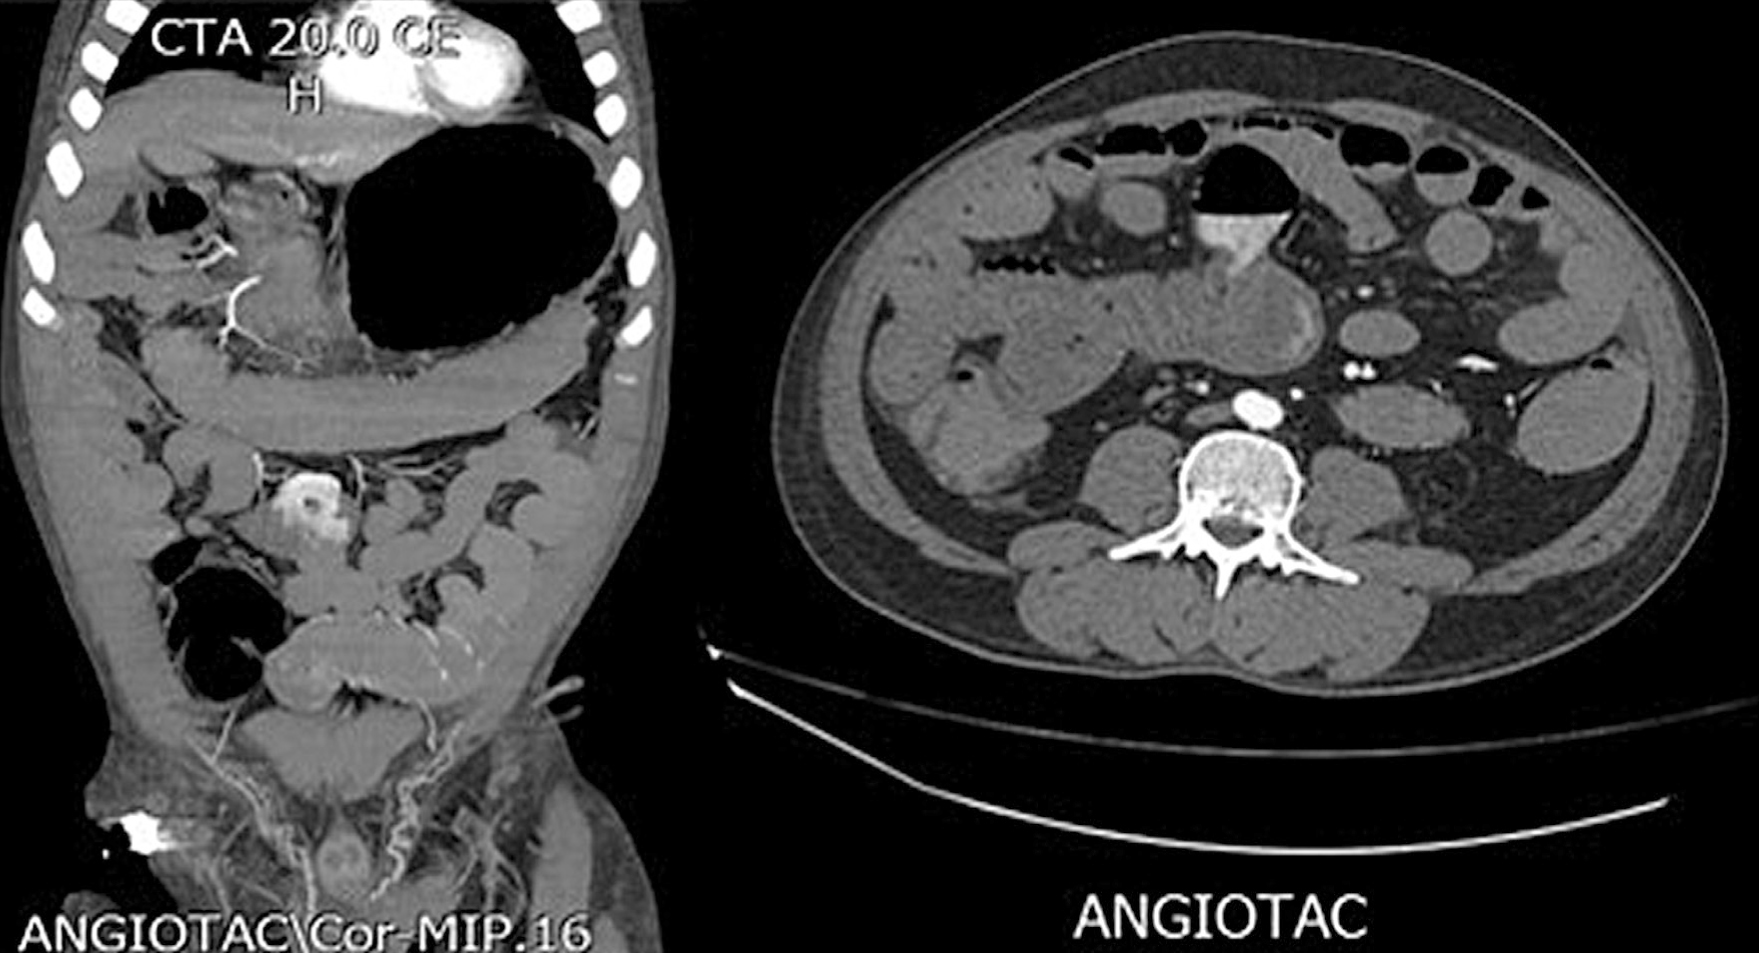 Figure 1. Computed axial tomography showing a thin-walled cystic structure with an air-fluid level corresponding to a jejunal diverticulum. Source: Radiology Service, Hospital Comuneros. Selected by the authors.